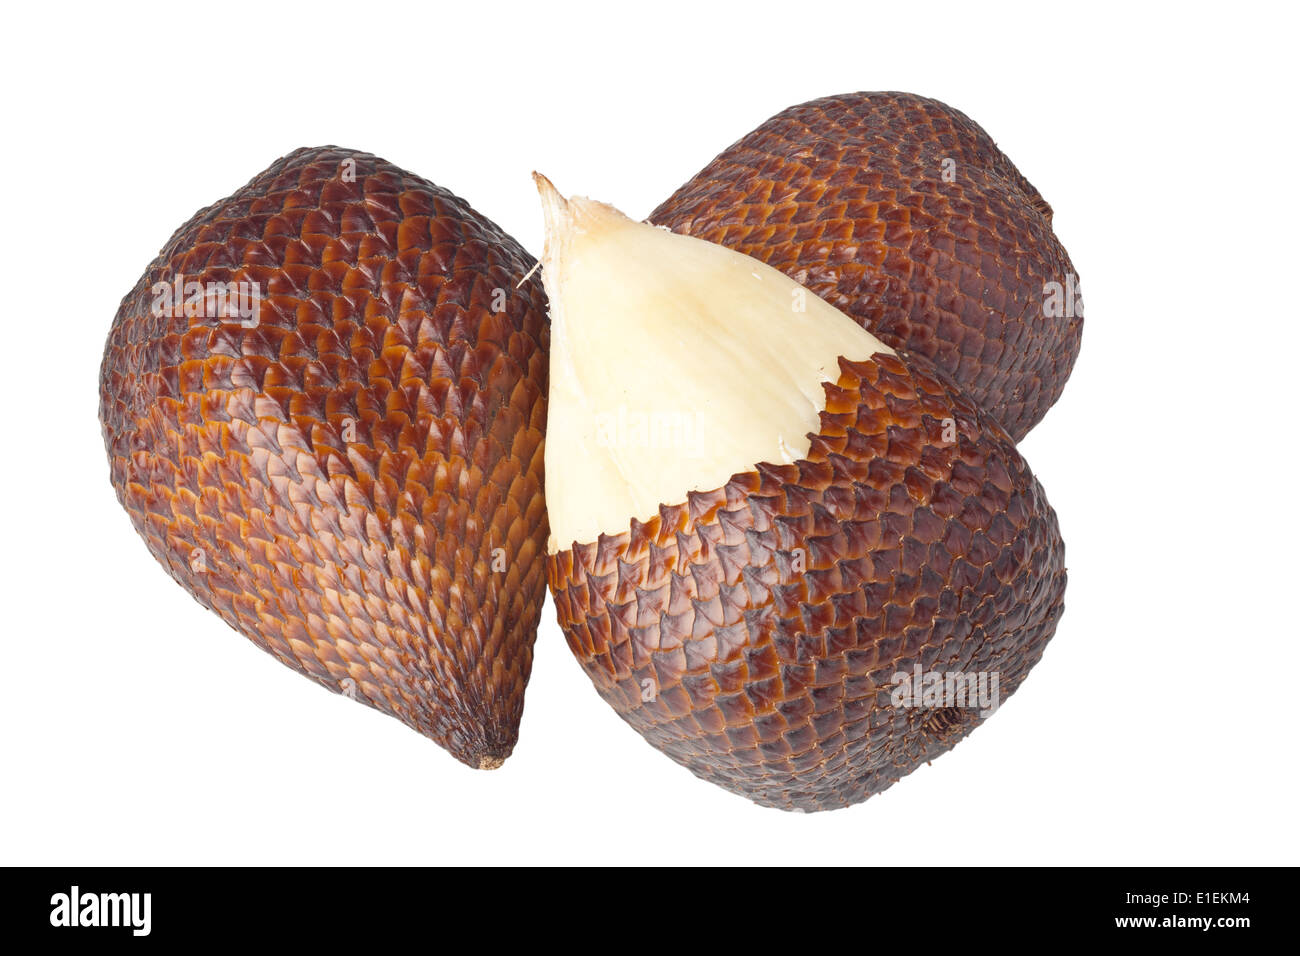 Scaly brown skinned snake fruits isolated on white background Stock Photo